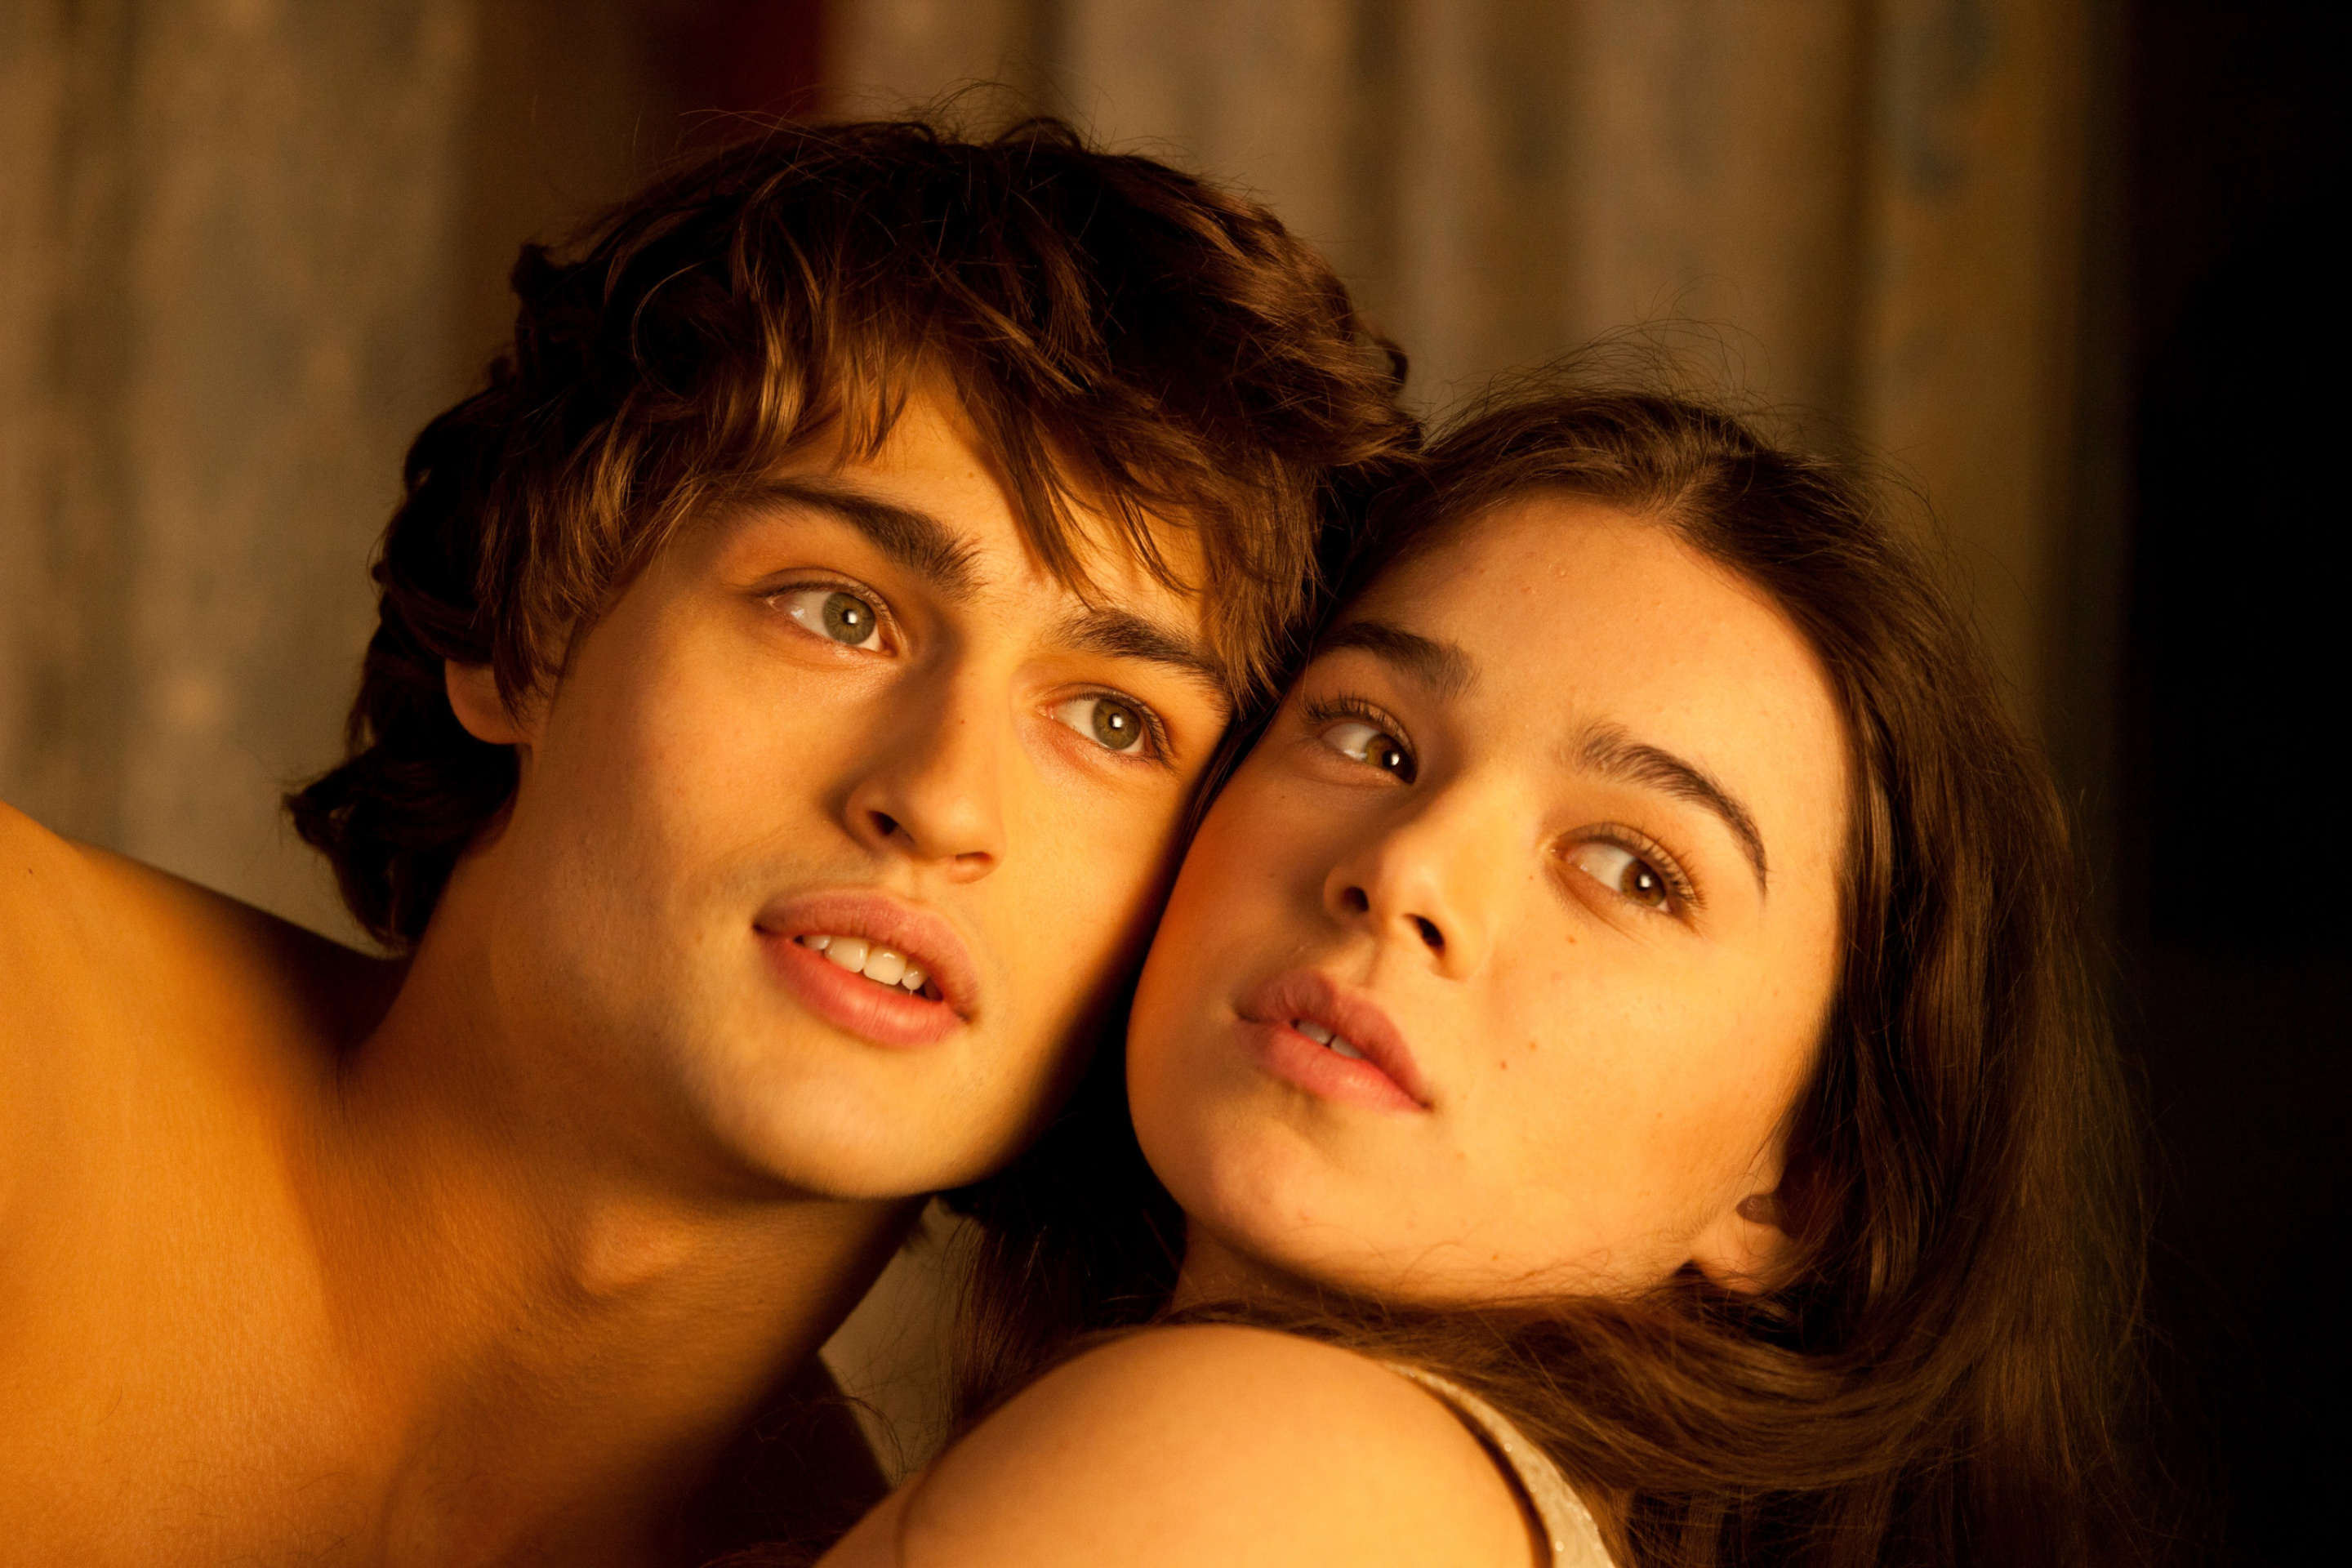 Romeo and Juliet with Hailee Steinfeld and Douglas Booth wallpaper 2880x1920